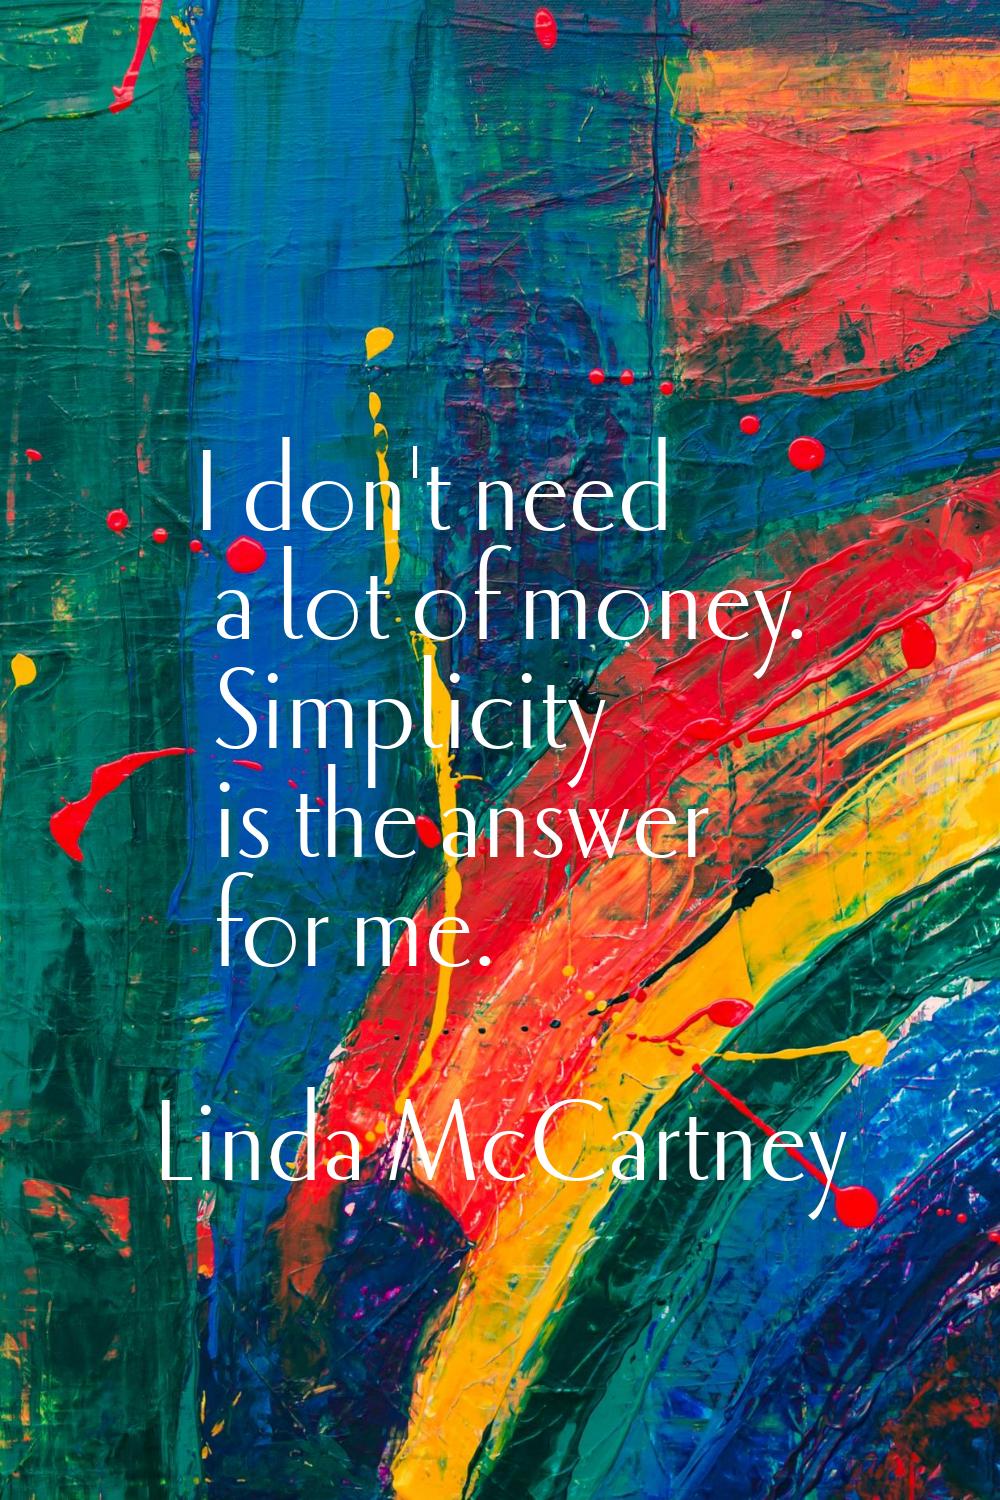 I don't need a lot of money. Simplicity is the answer for me.